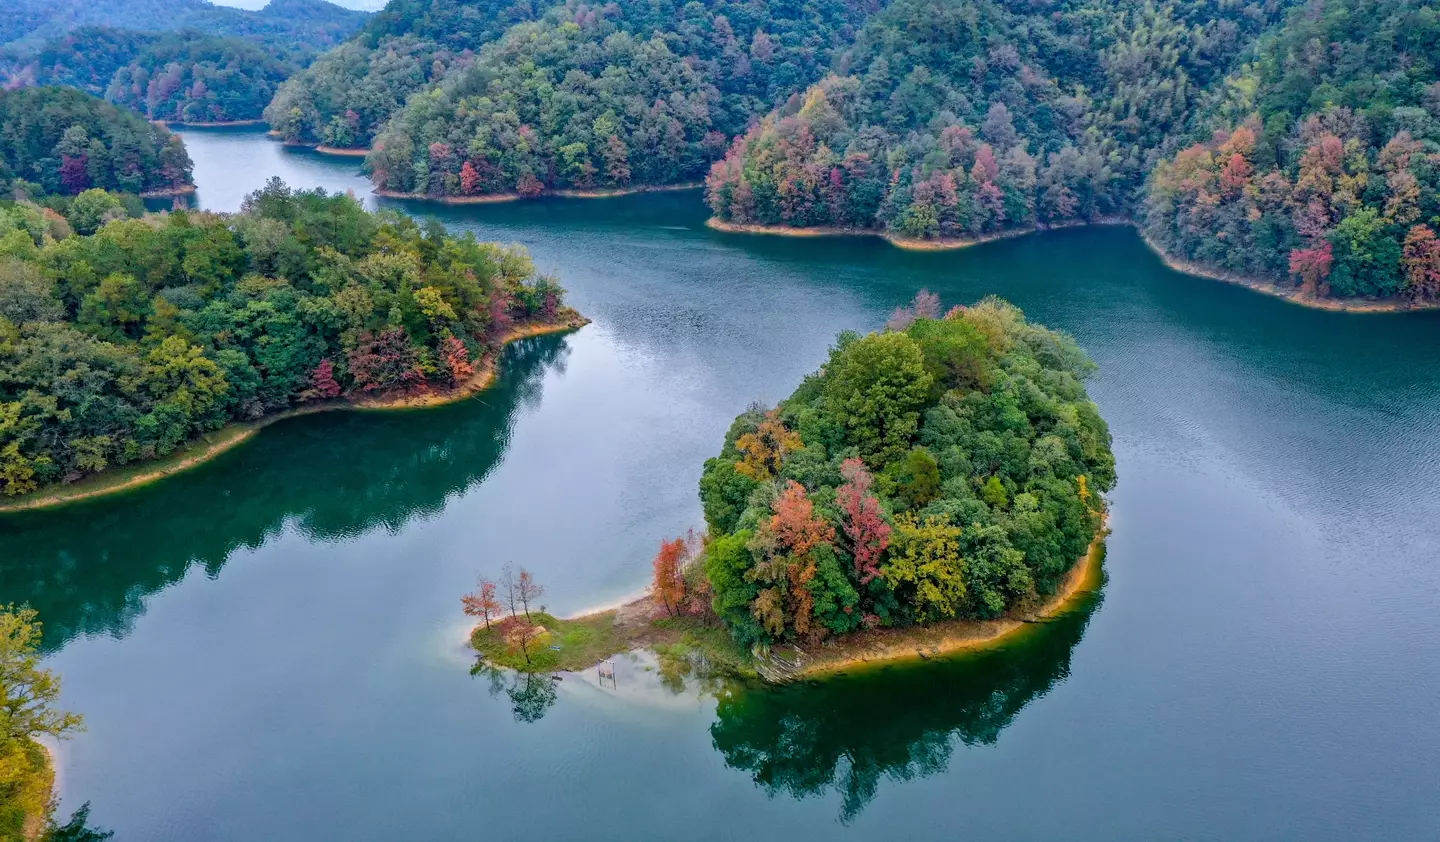 Beneath the man-made Qiandao Lake is the ancient city of Shicheng.